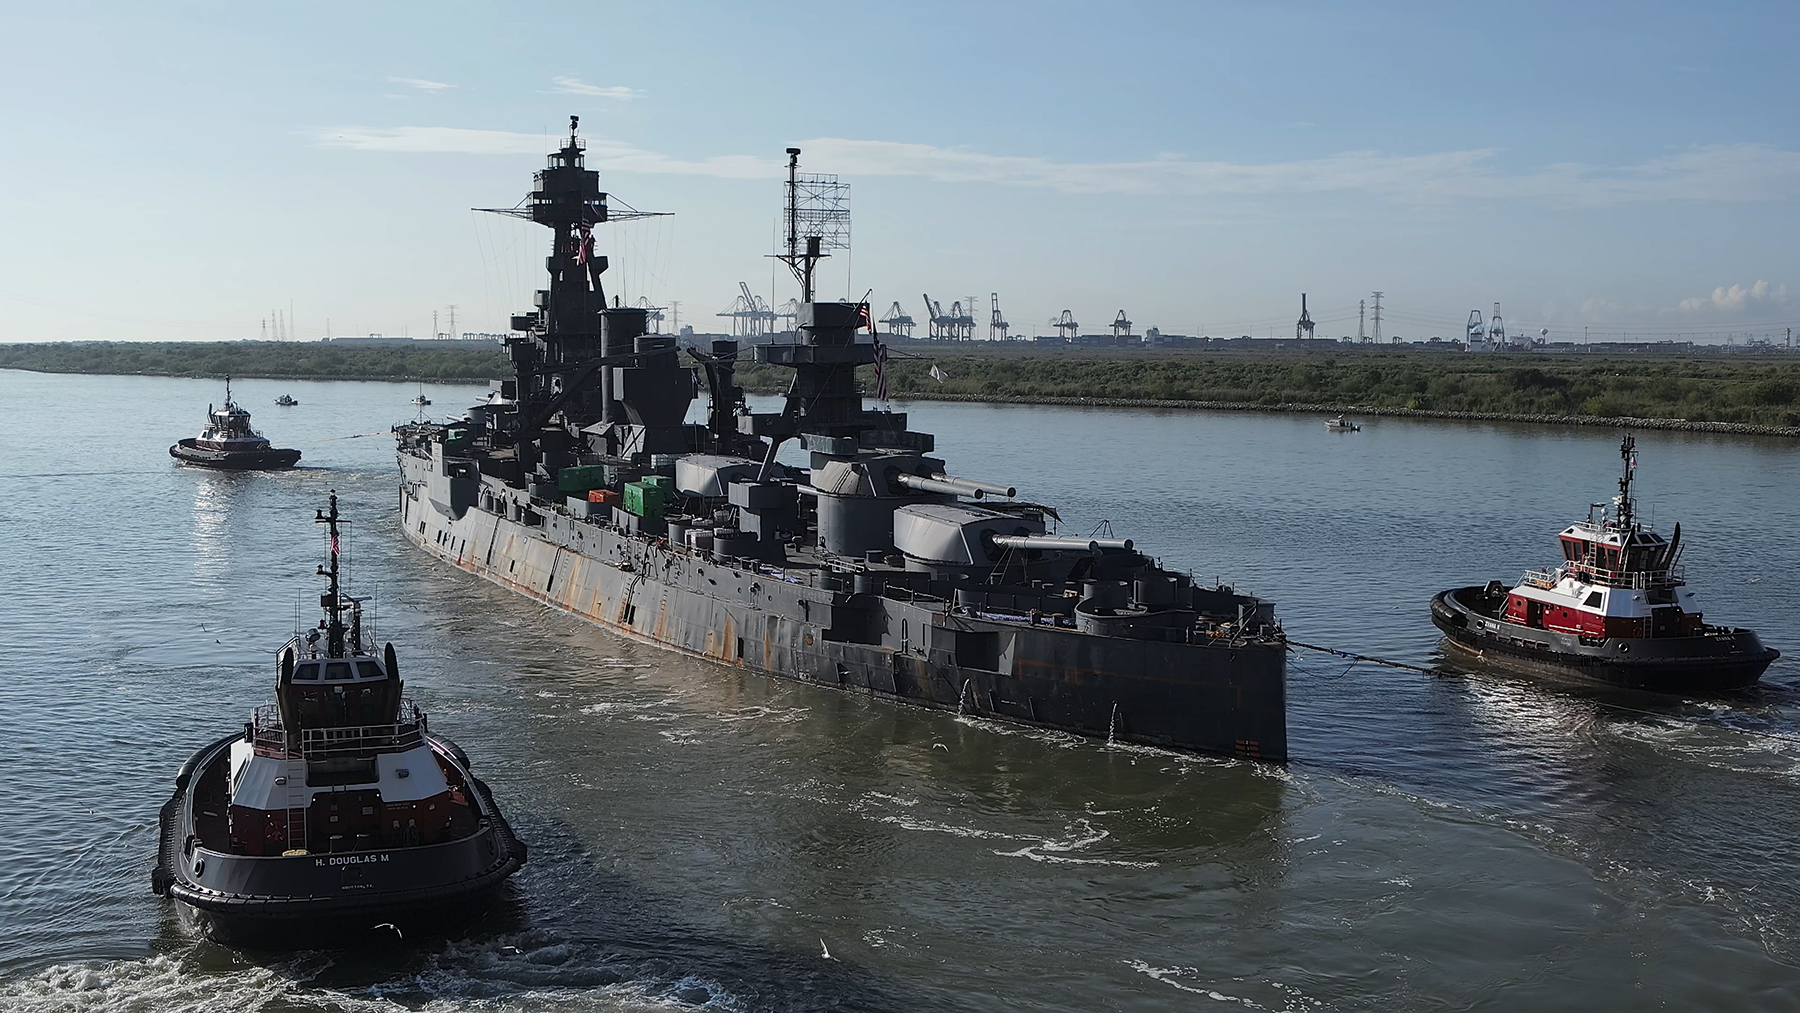 Surrounded by a small flotilla of tugboats and other escorting vessels, the Texas was towed through the Houston Ship Channel in late August. (Image courtesy of Captiv Creative)